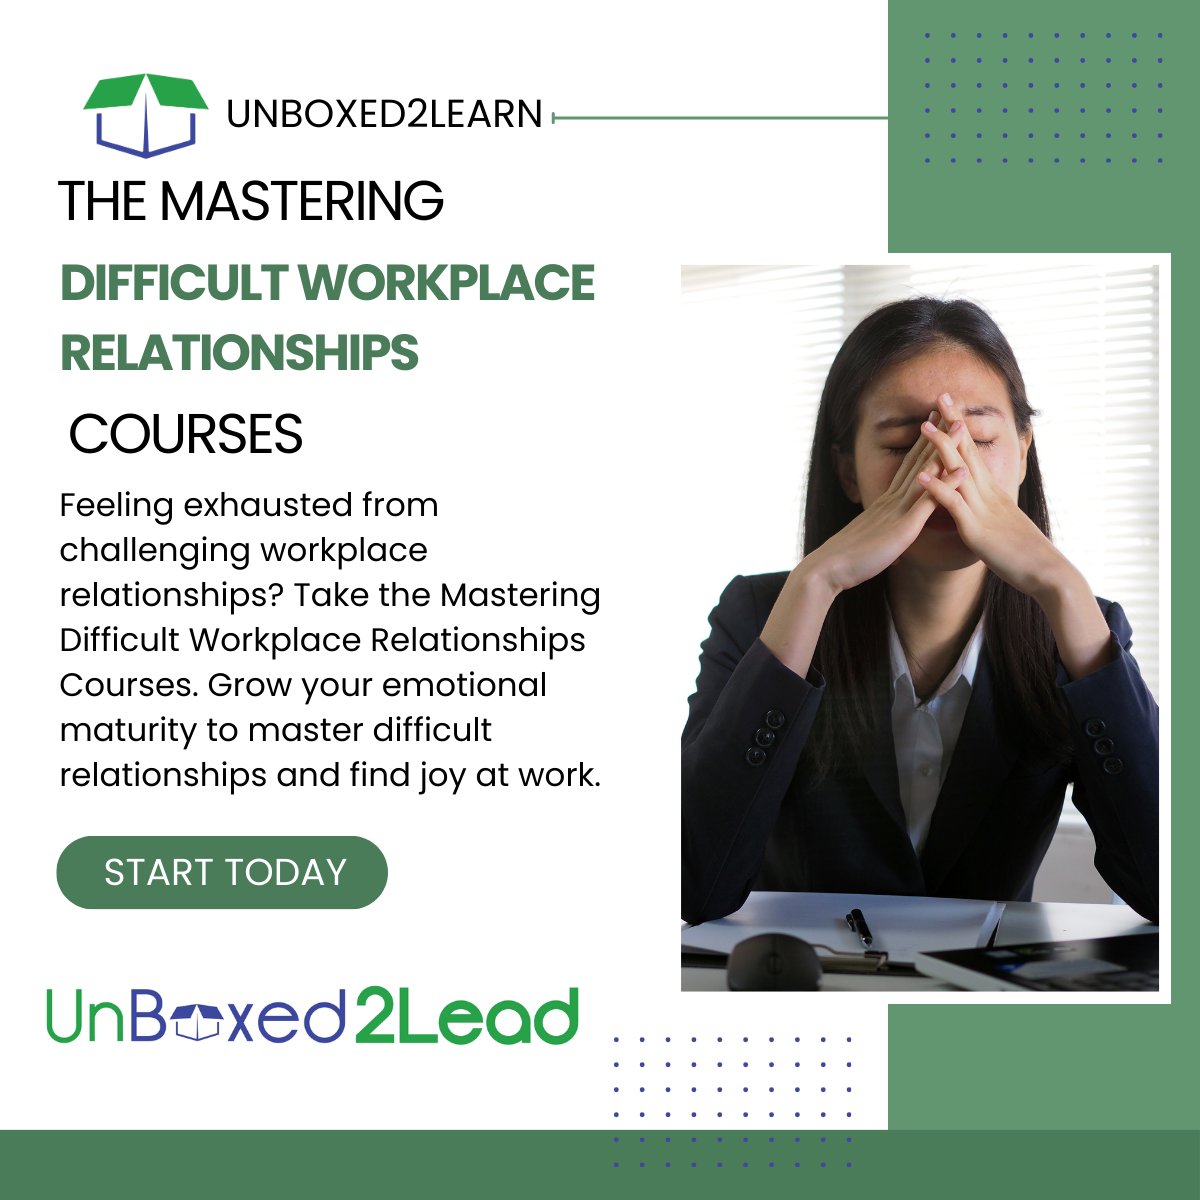 Feeling exhausted from challenging workplace relationships? Take the Mastering Difficult Workplace Relationships Courses.
Sign up TODAY: unboxed2lead.com/unboxed2learn

#Unboxed2Lead#LeadershipSkills#WorkplaceRelationships#ConflictResolution#EmotionalMaturity #ProfessionalDevelopment